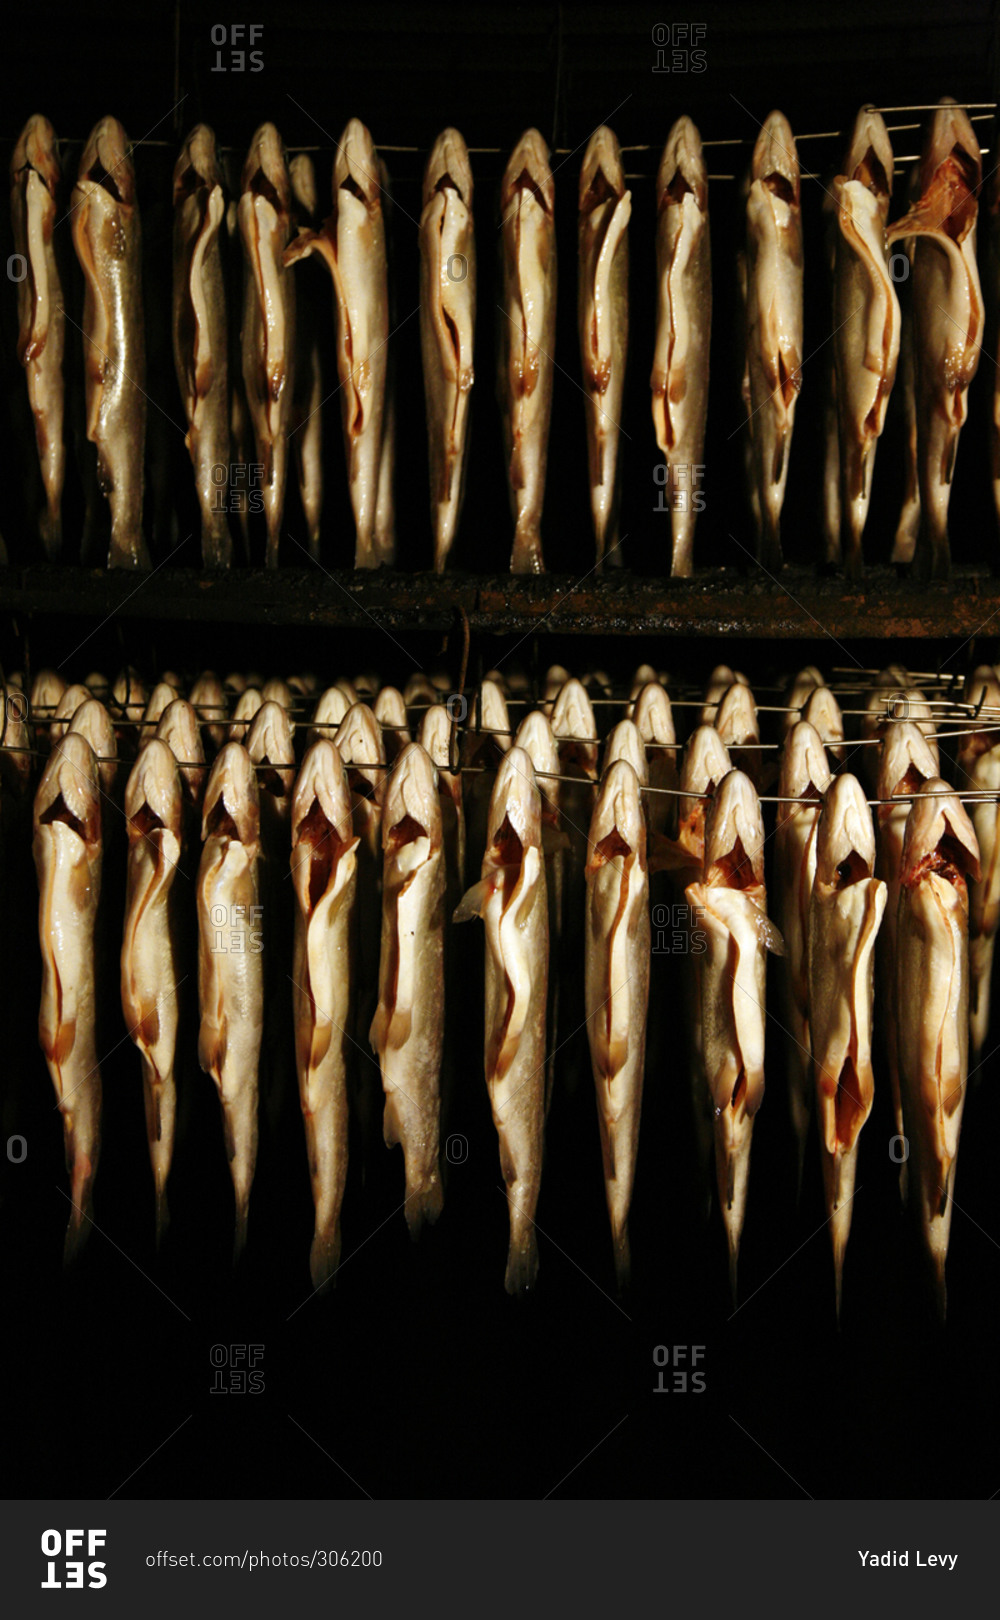 Whole trout fish being smoked at the Weiss Family Smokery, Patagonia, Argentina